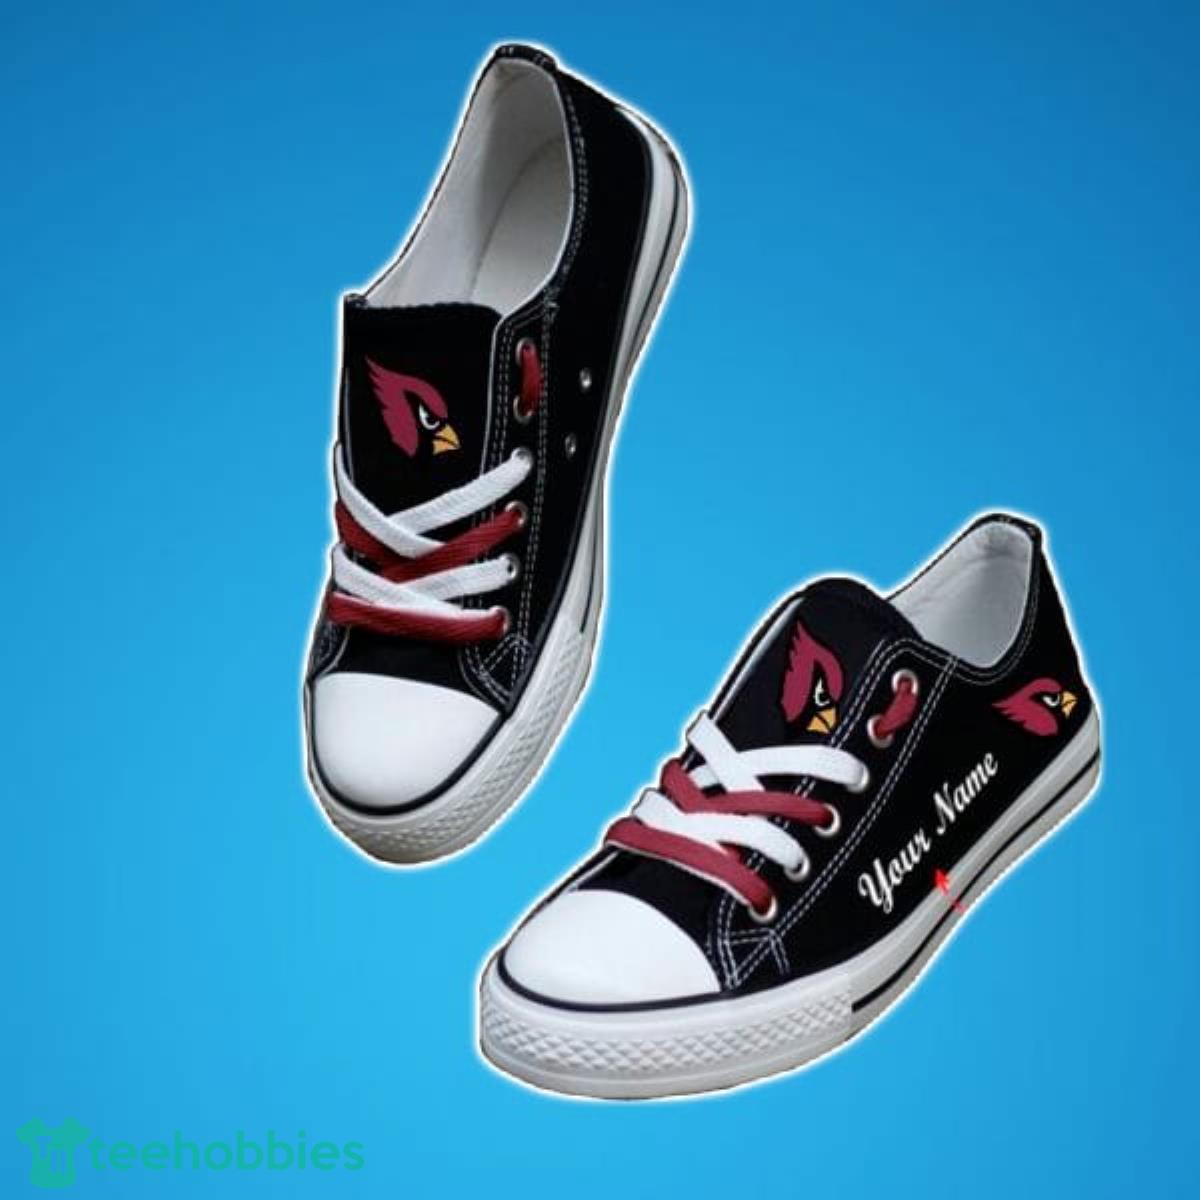 Arizona Cardinals Personalized New Low Top Shoes Best Gift For Men And Women Fans Product Photo 2